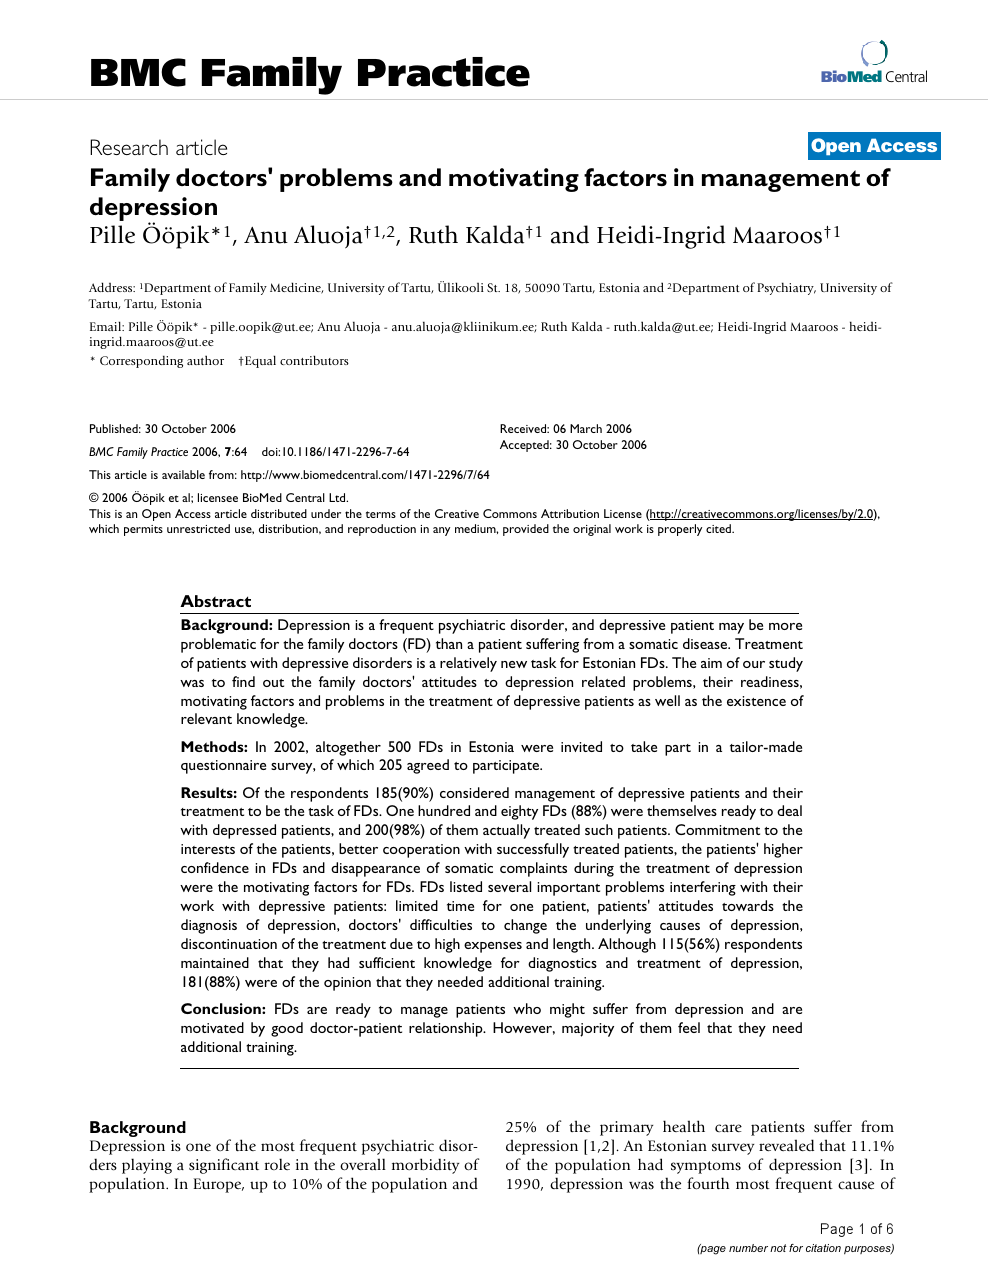 Family Doctors Problems And Motivating Factors In Management Of Depression Topic Of Research Paper In Clinical Medicine Download Scholarly Article Pdf And Read For Free On Cyberleninka Open Science Hub